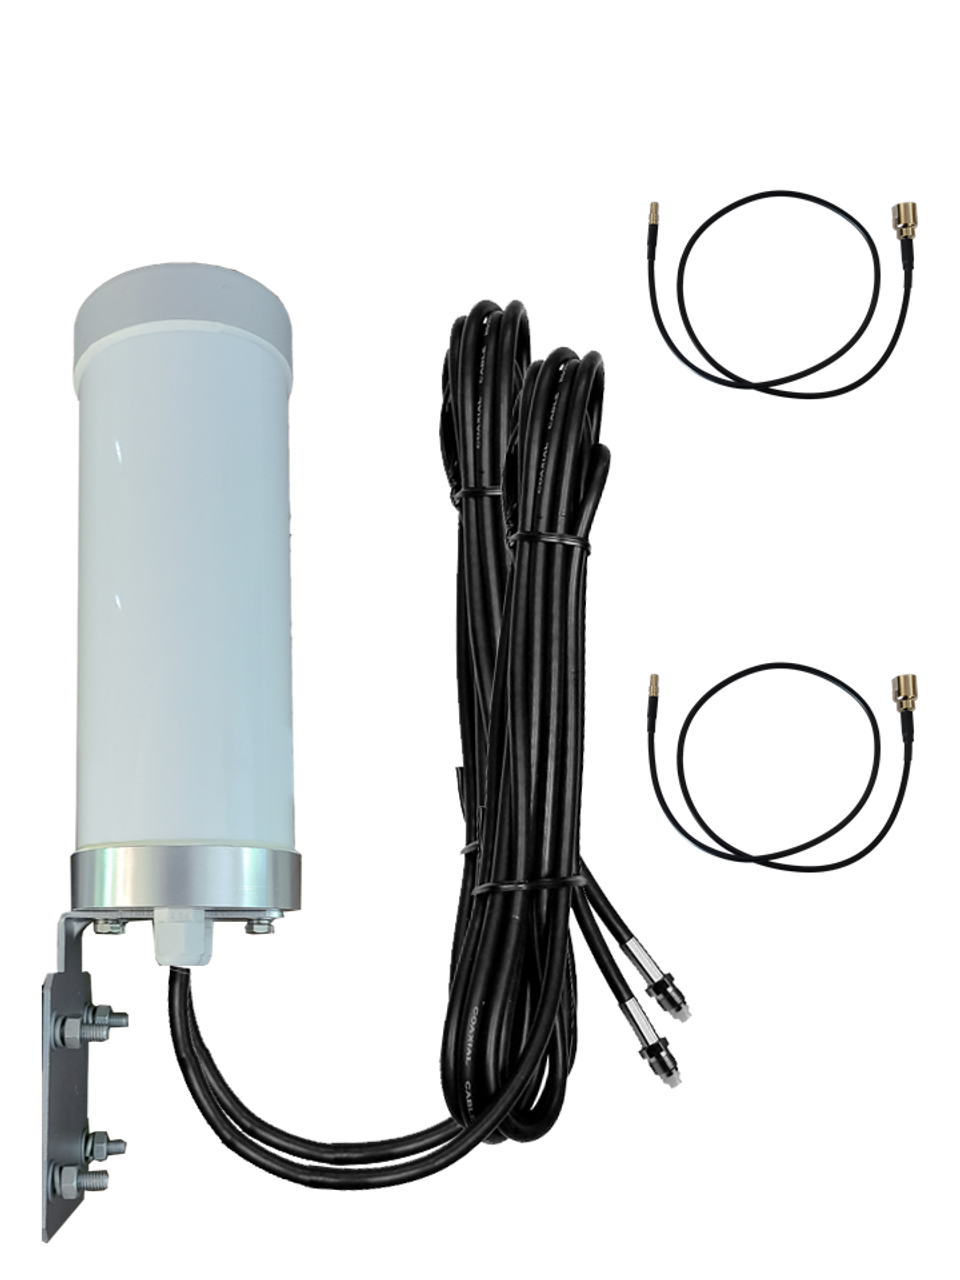 M29 MIMO Omni Directional 2 x Cellular 4G LTE 5G IoT M2M Bracket Mount Antenna w/2 x 16ft Coax Cables for Netgear NightHawk MR5000